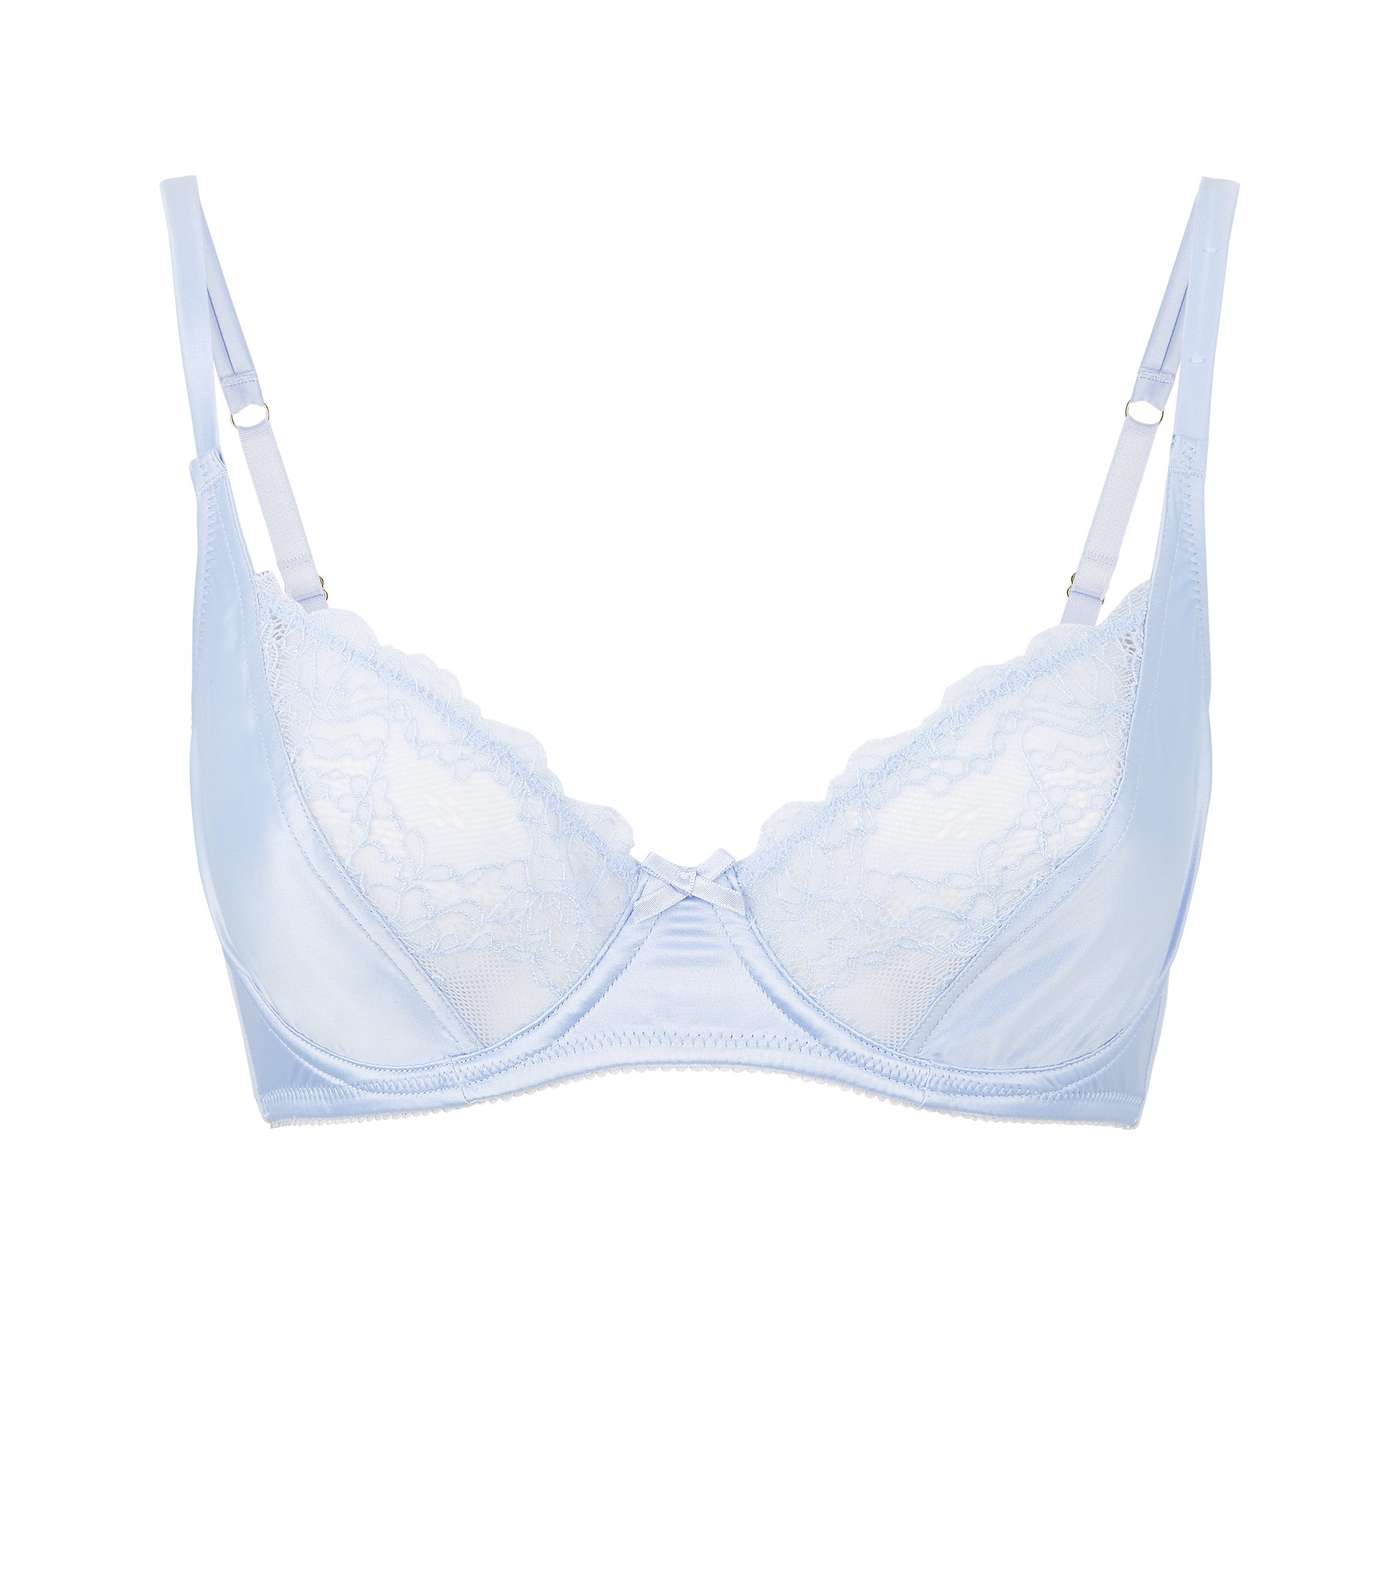 Pale Blue Satin Lace Underwired Bra Image 3